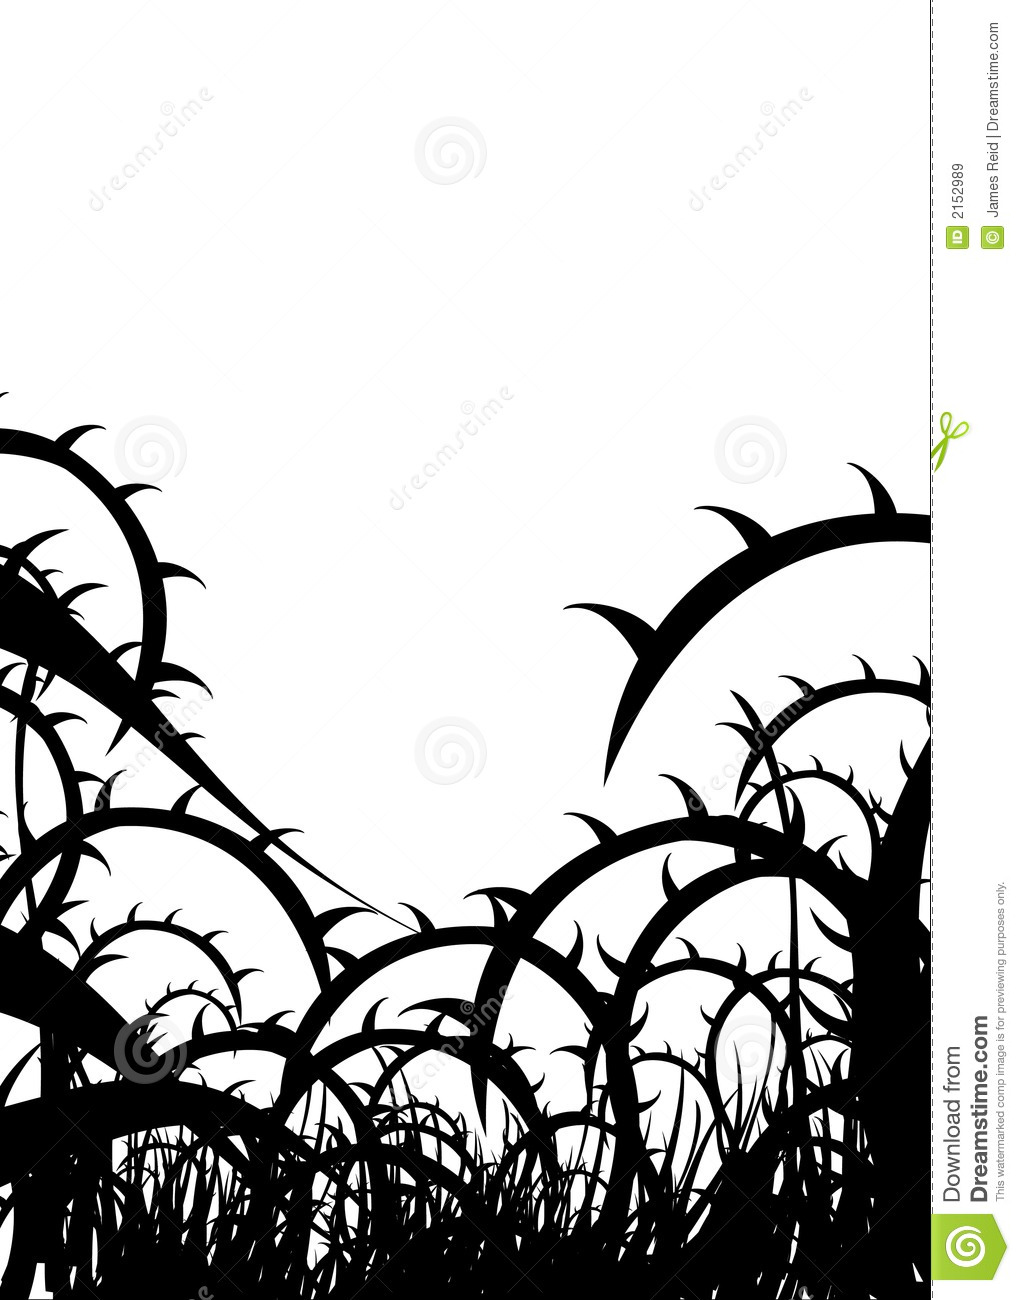 Created In Adobe Illustrator Cs2  Black Thorny Background And Weeds At